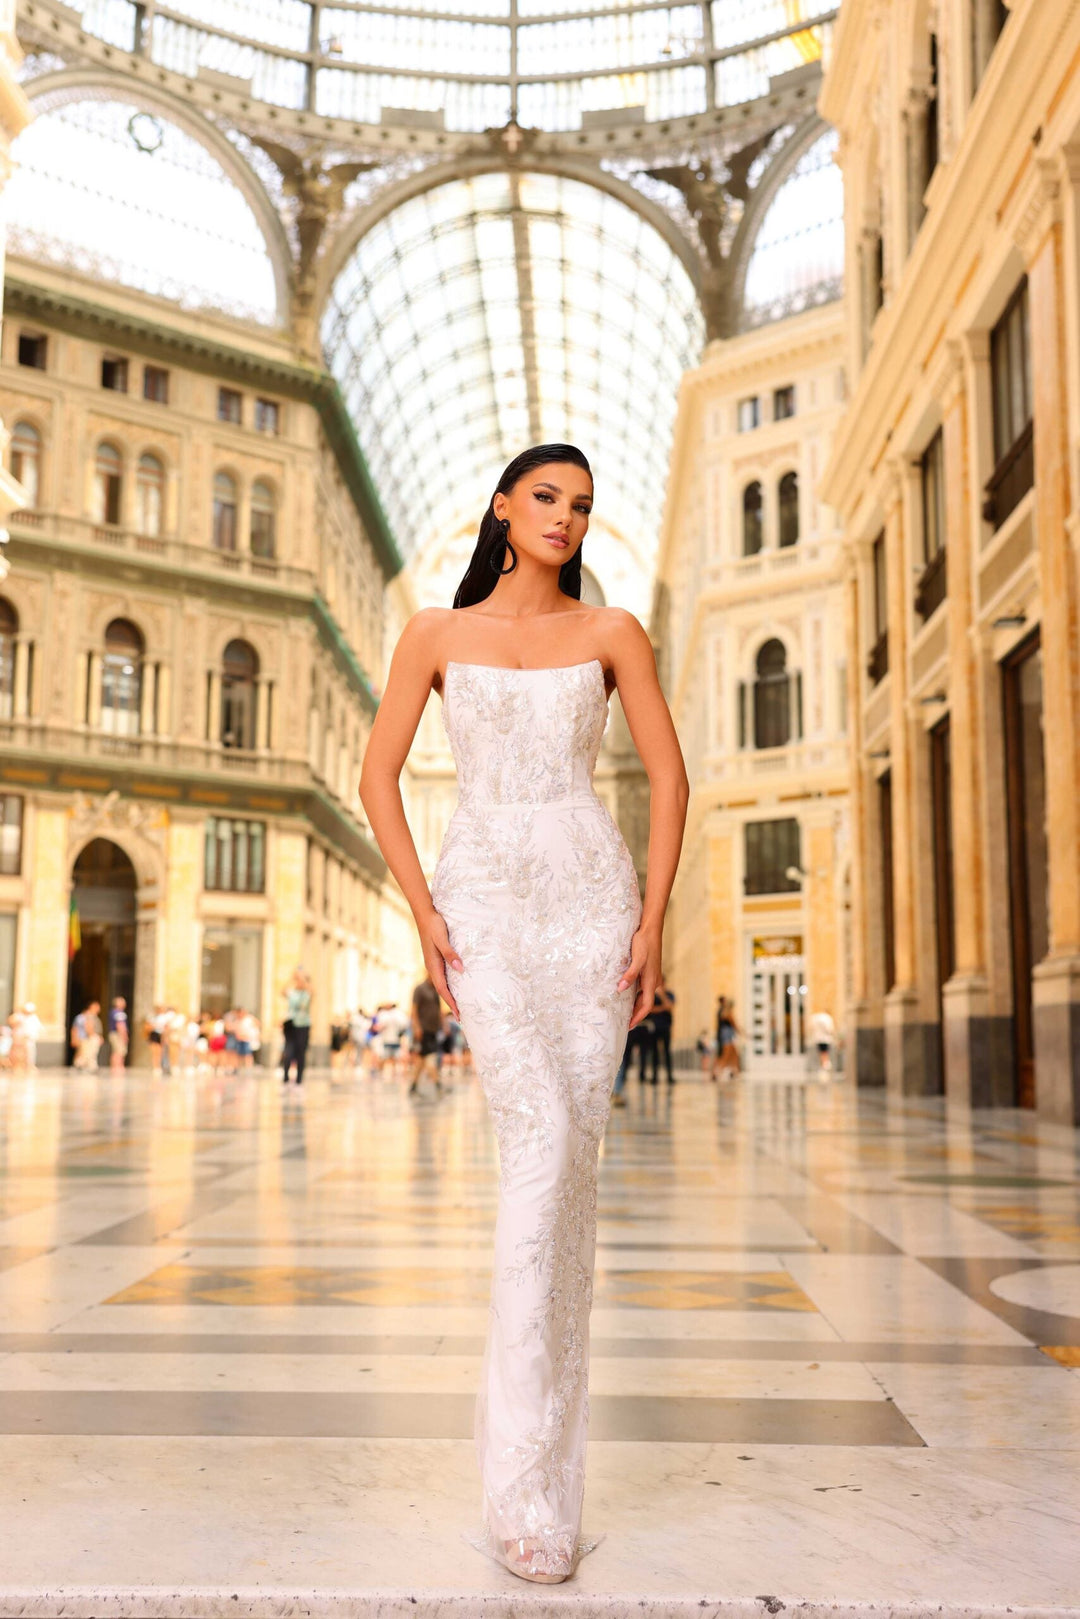 Embellished Gown NC1082 | Nicoletta Dress - Morvarids in ivory